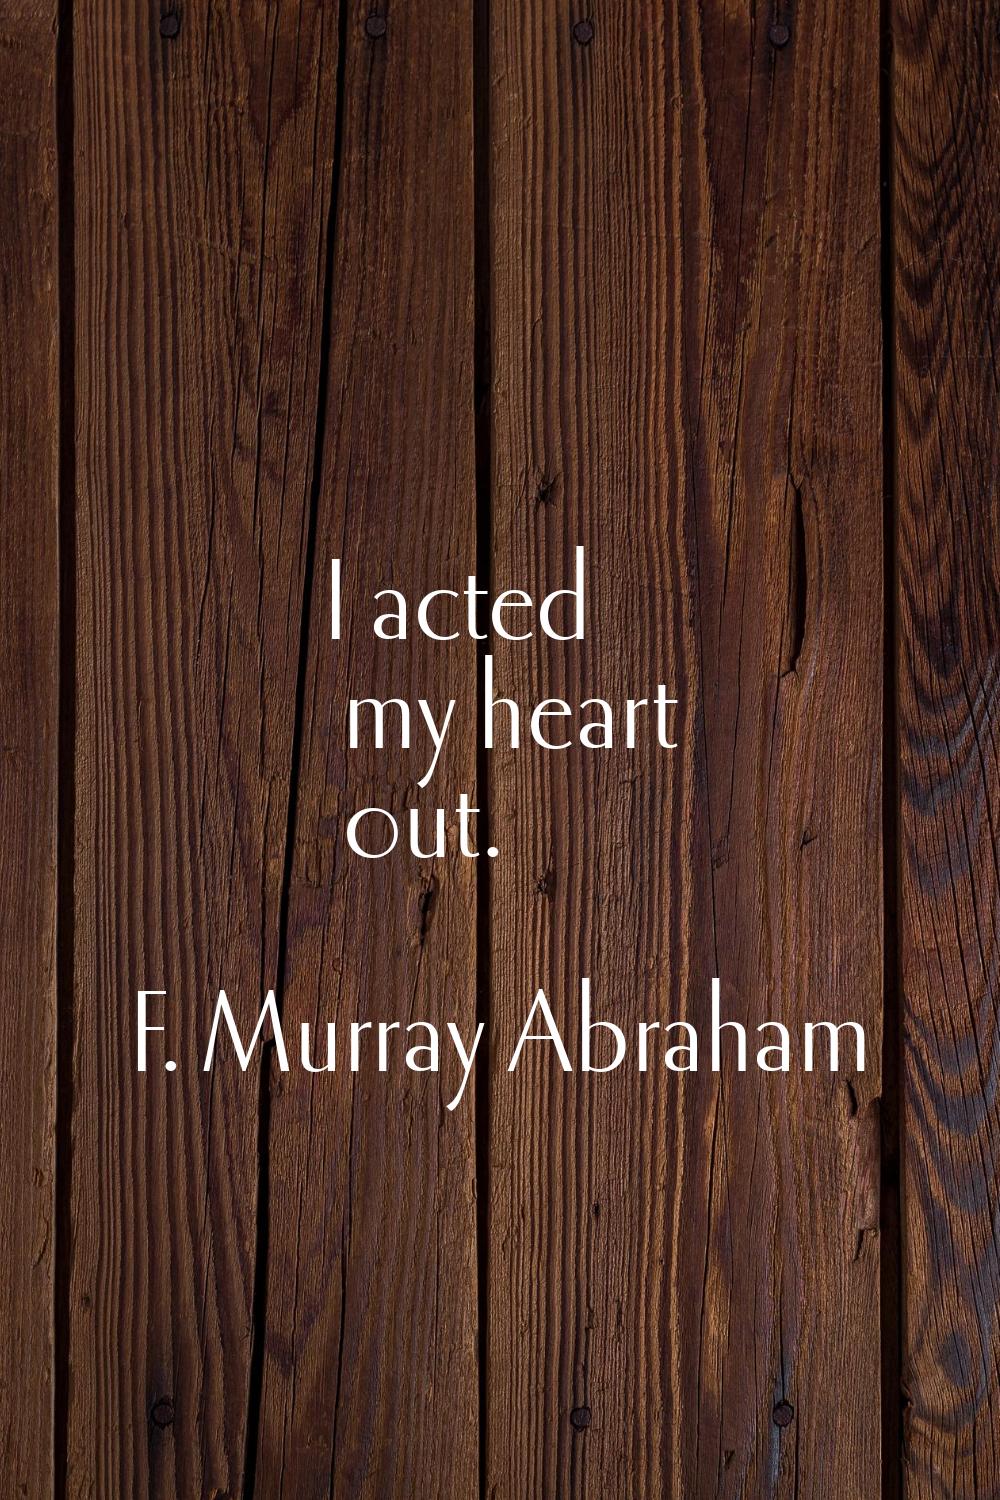 I acted my heart out.